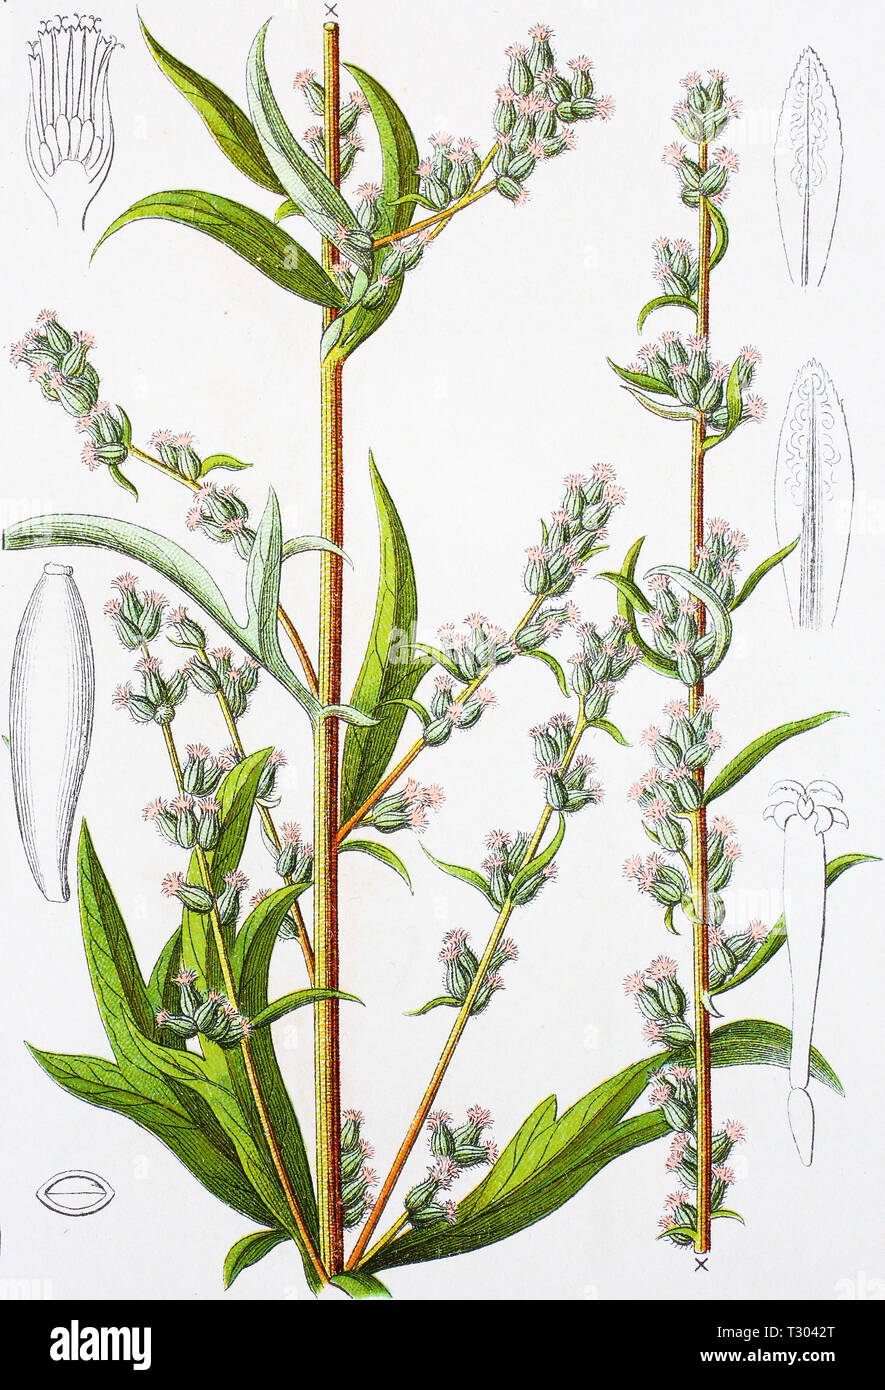 Digital improved reproduction of an illustration of, echter Beifuß, Artemisia vulgaris, common mugwort, from an original print of the 19th century Stock Photo